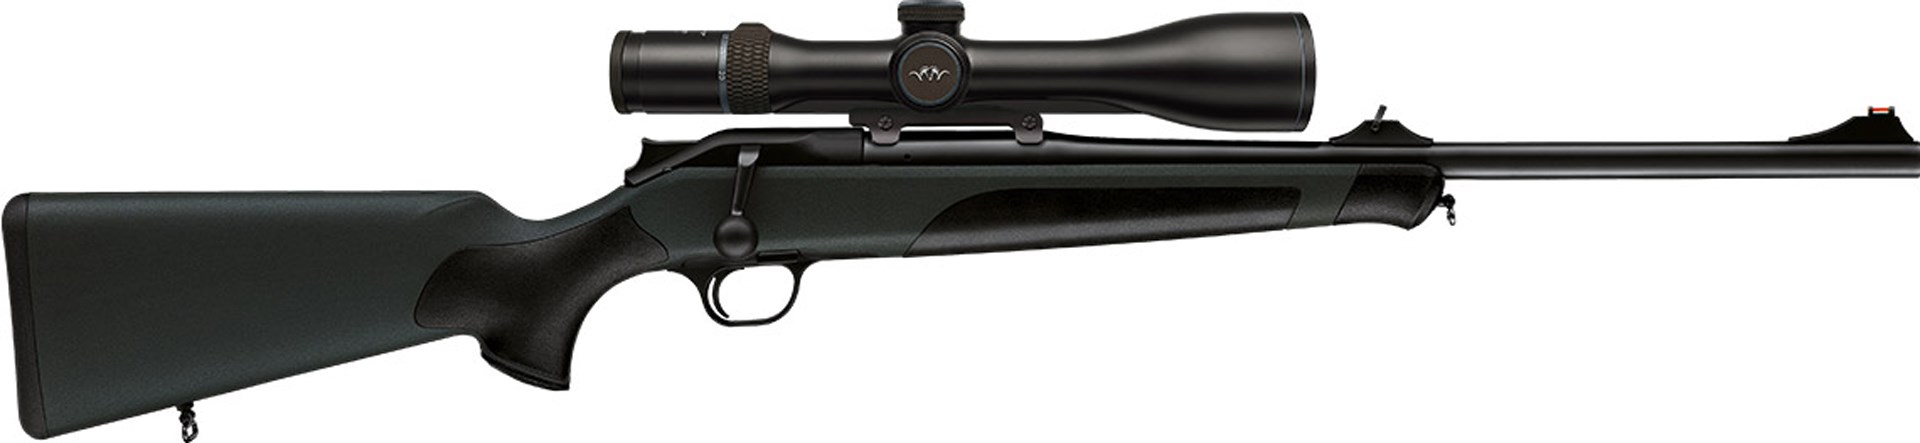 Blaser R8 Professional black bolt-action hunting rifle with riflescope right-side view